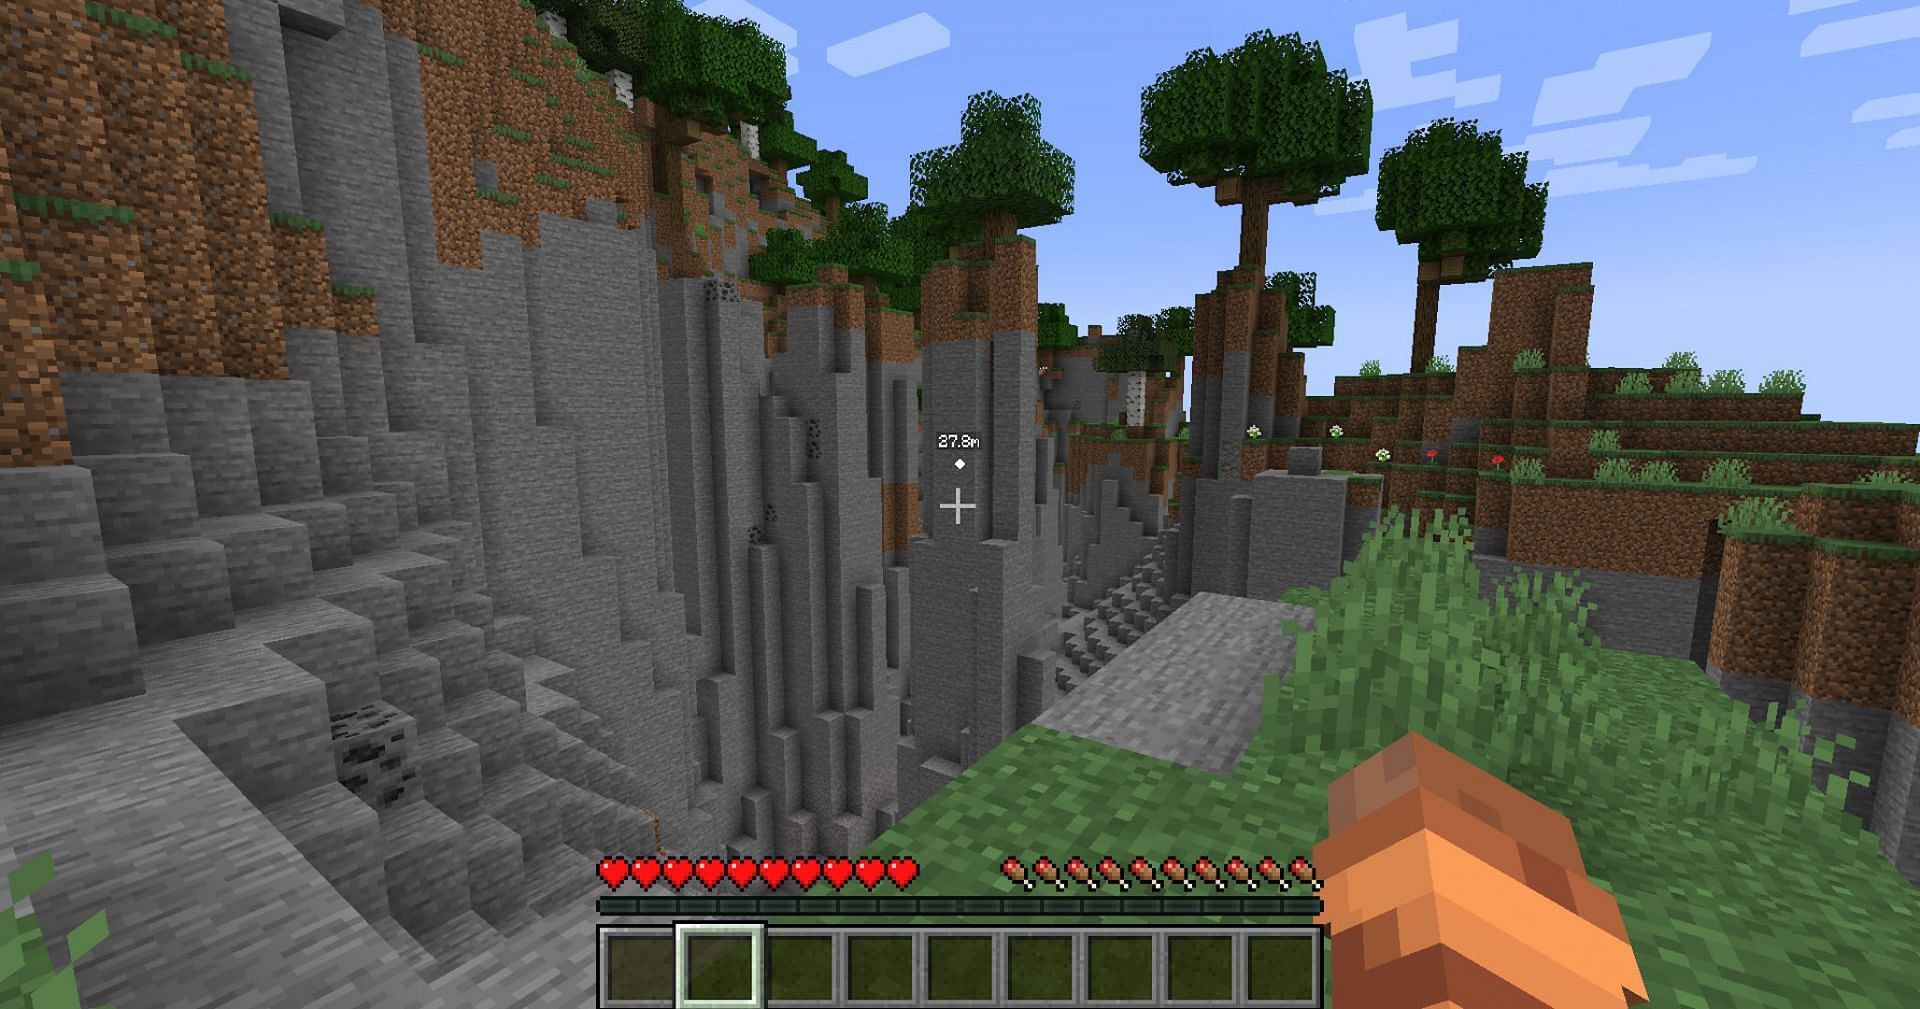 Pings are very useful to point out interesting sights (Image via Mojang)